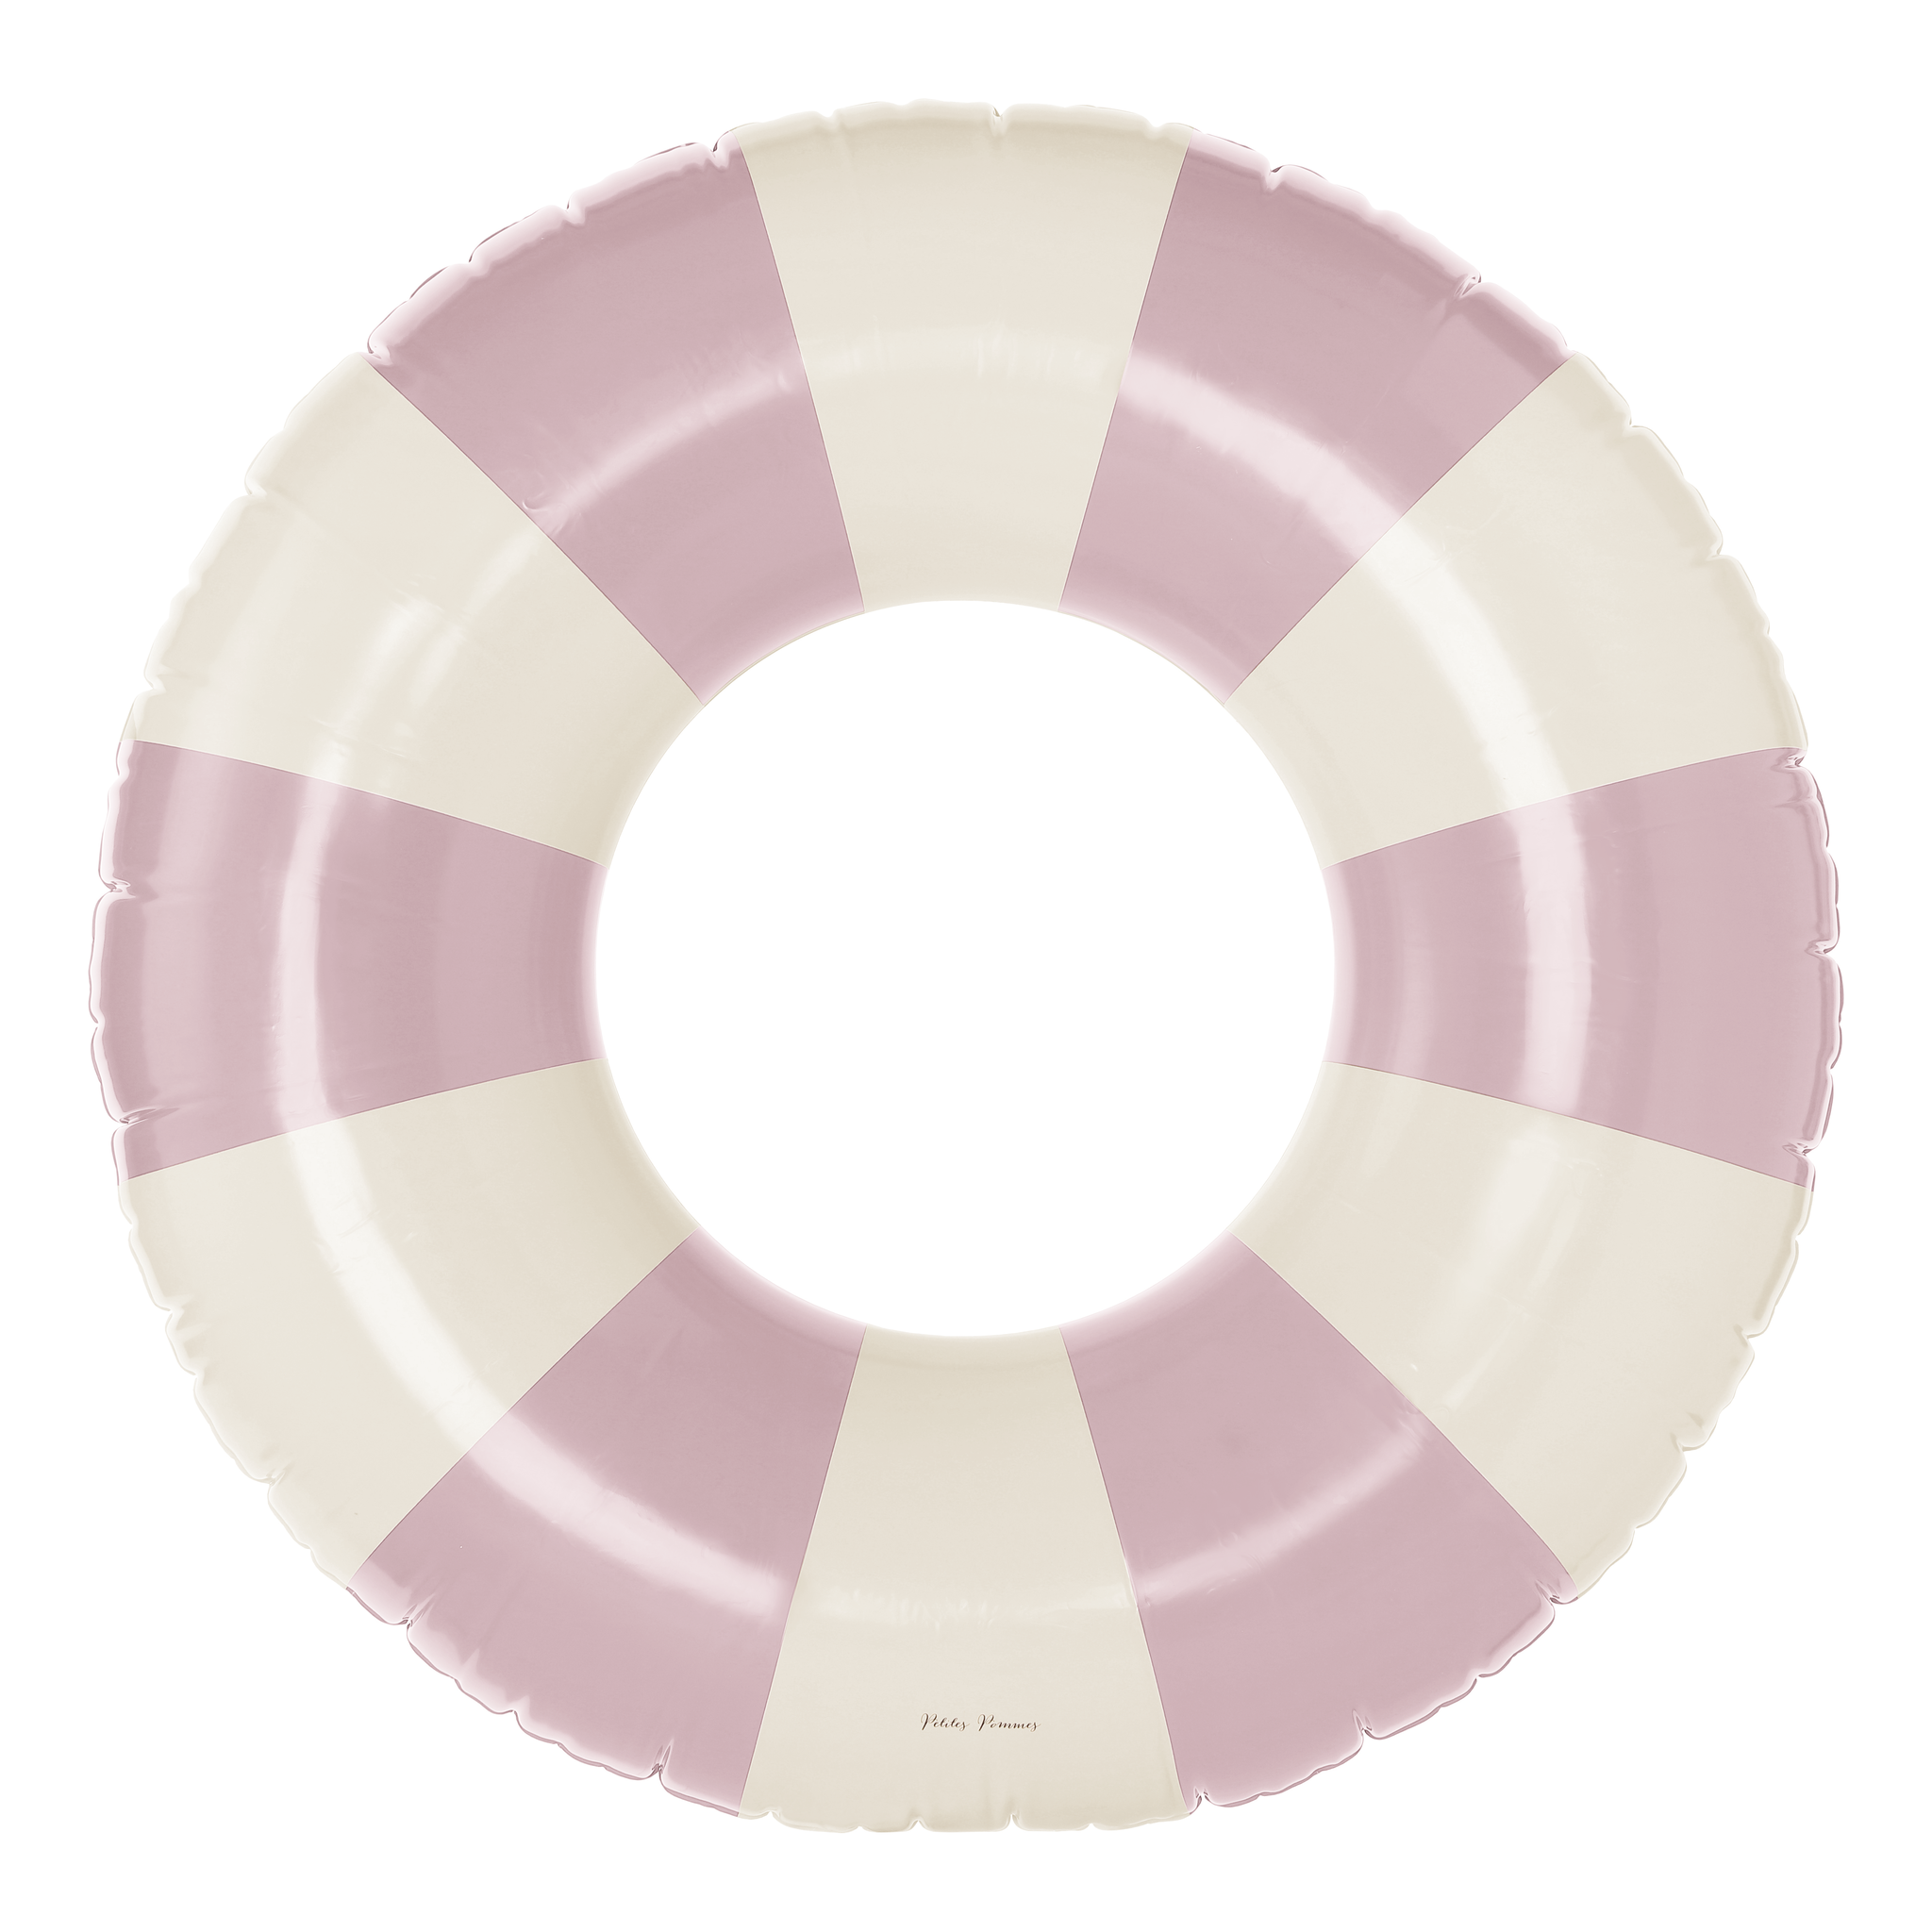 Petites Pommes Classic Floats Schwimmring 120cm in FRENCH ROSE